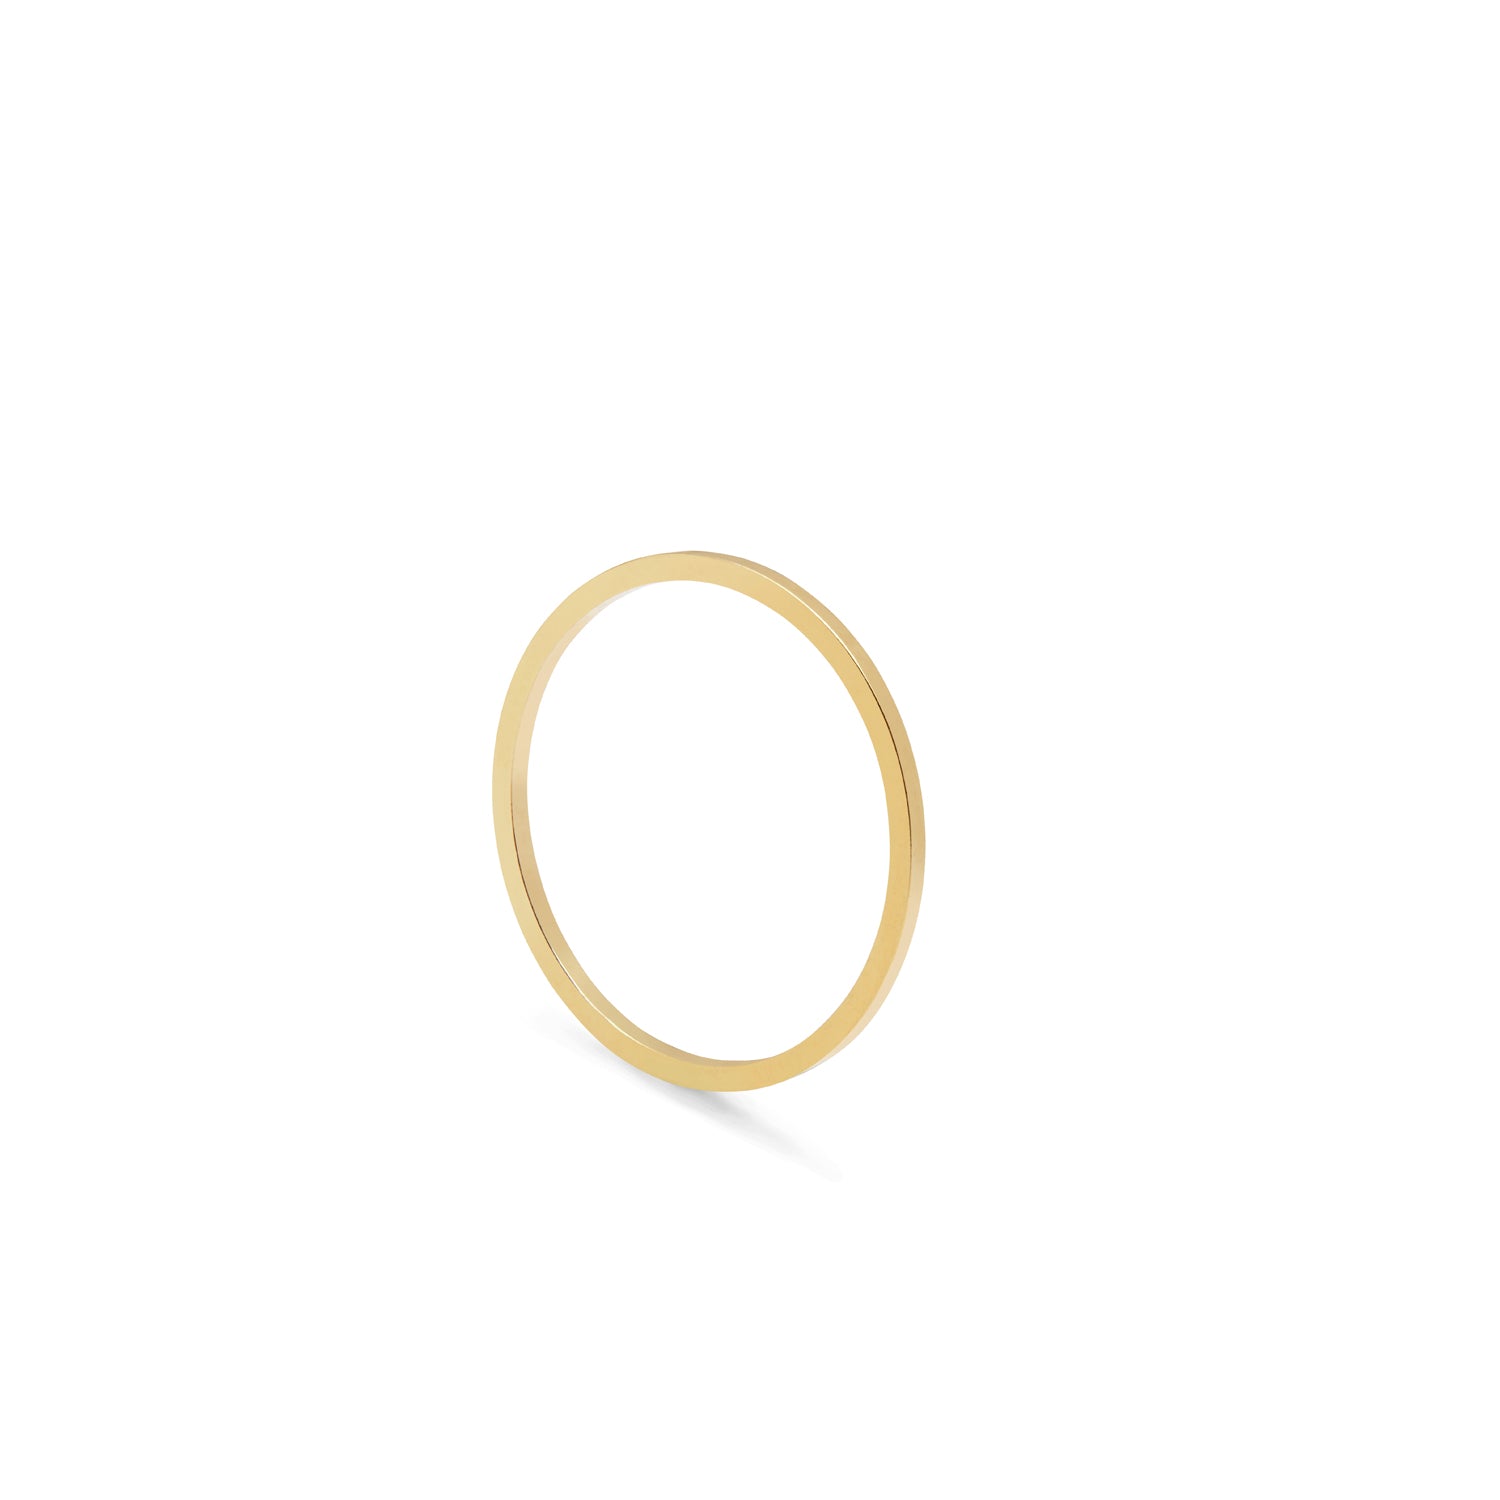 Ultra Skinny Square Stacking Ring - 9k Yellow Gold - Myia Bonner Jewellery